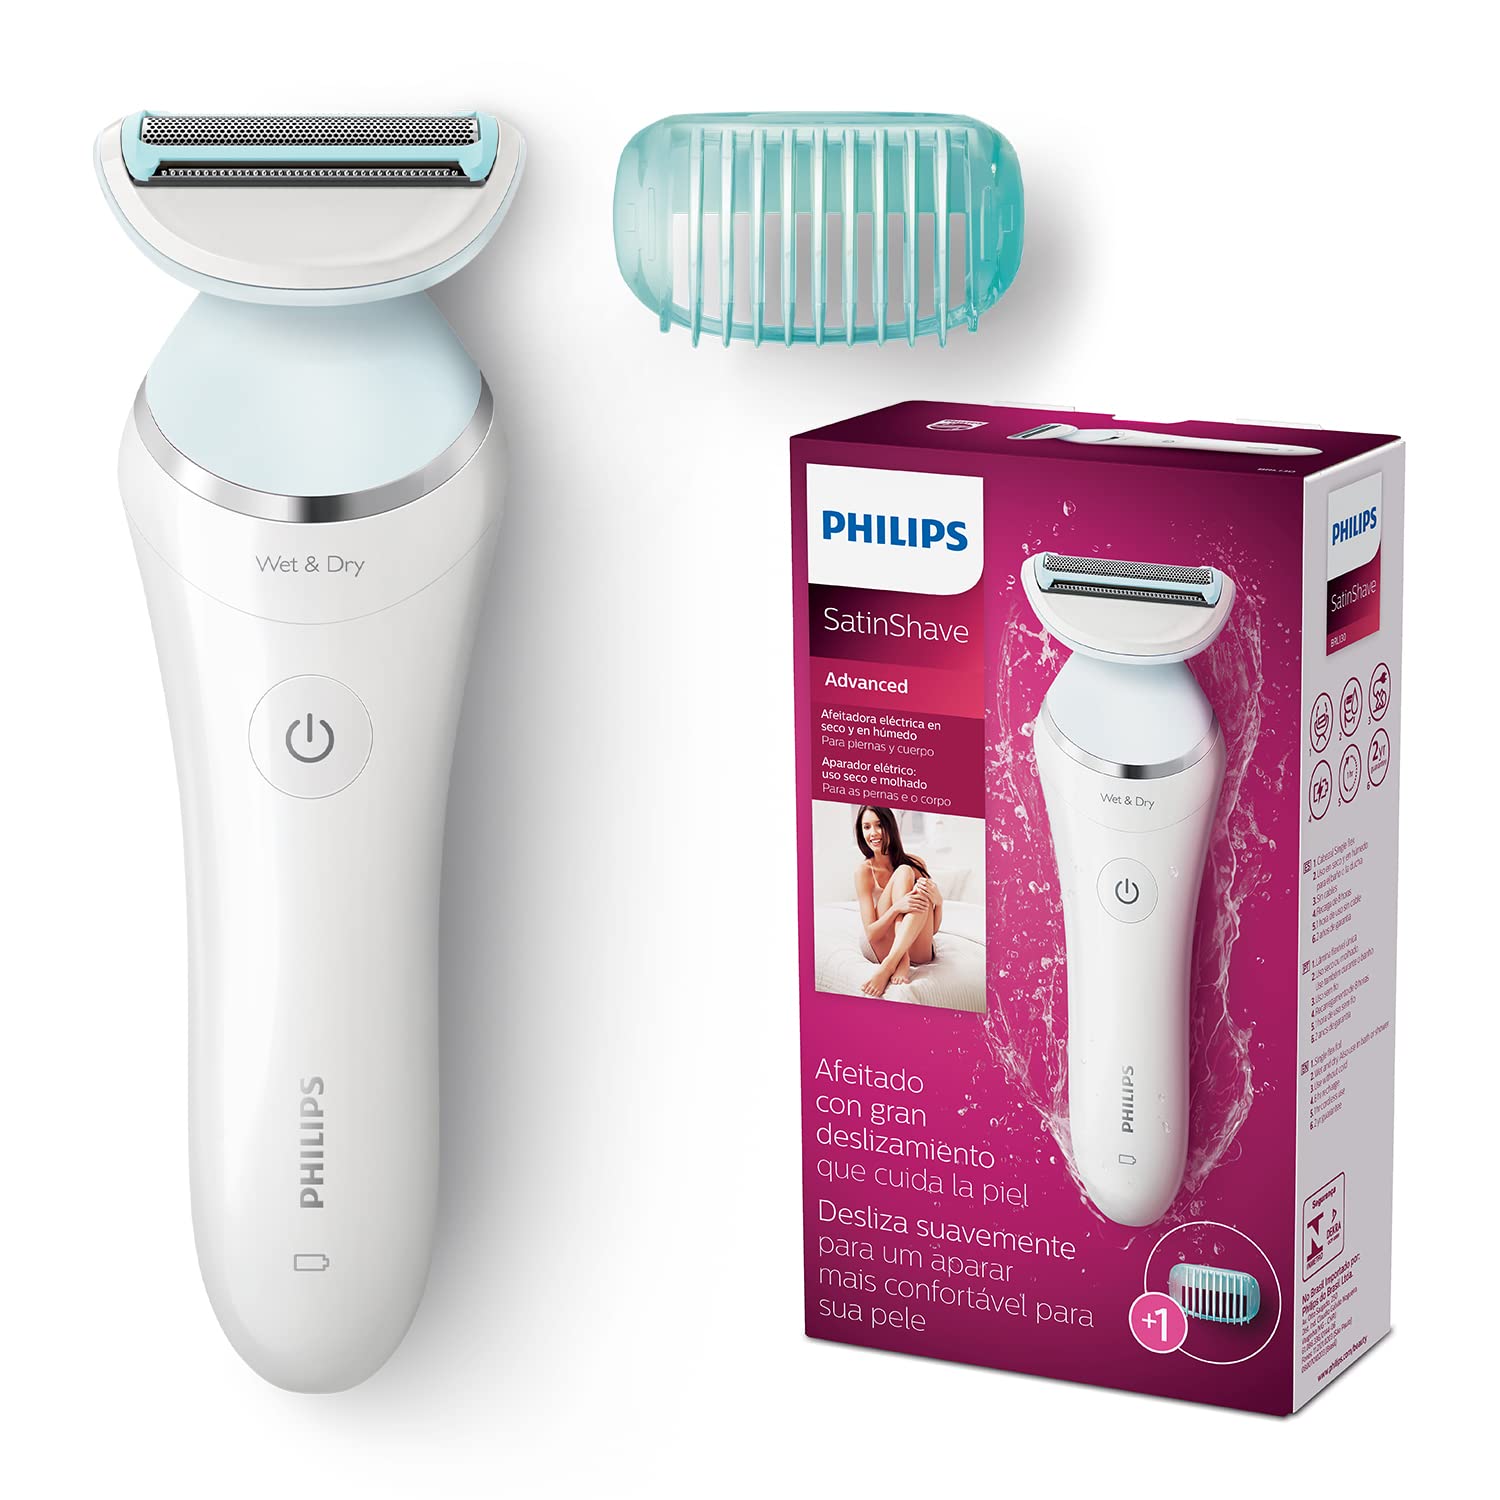 Philips SatinShave Advanced Wet and Dry Rechargeable Lady Shaver, Cordless Electric Razor with Bikini Attachment, BRL130/00